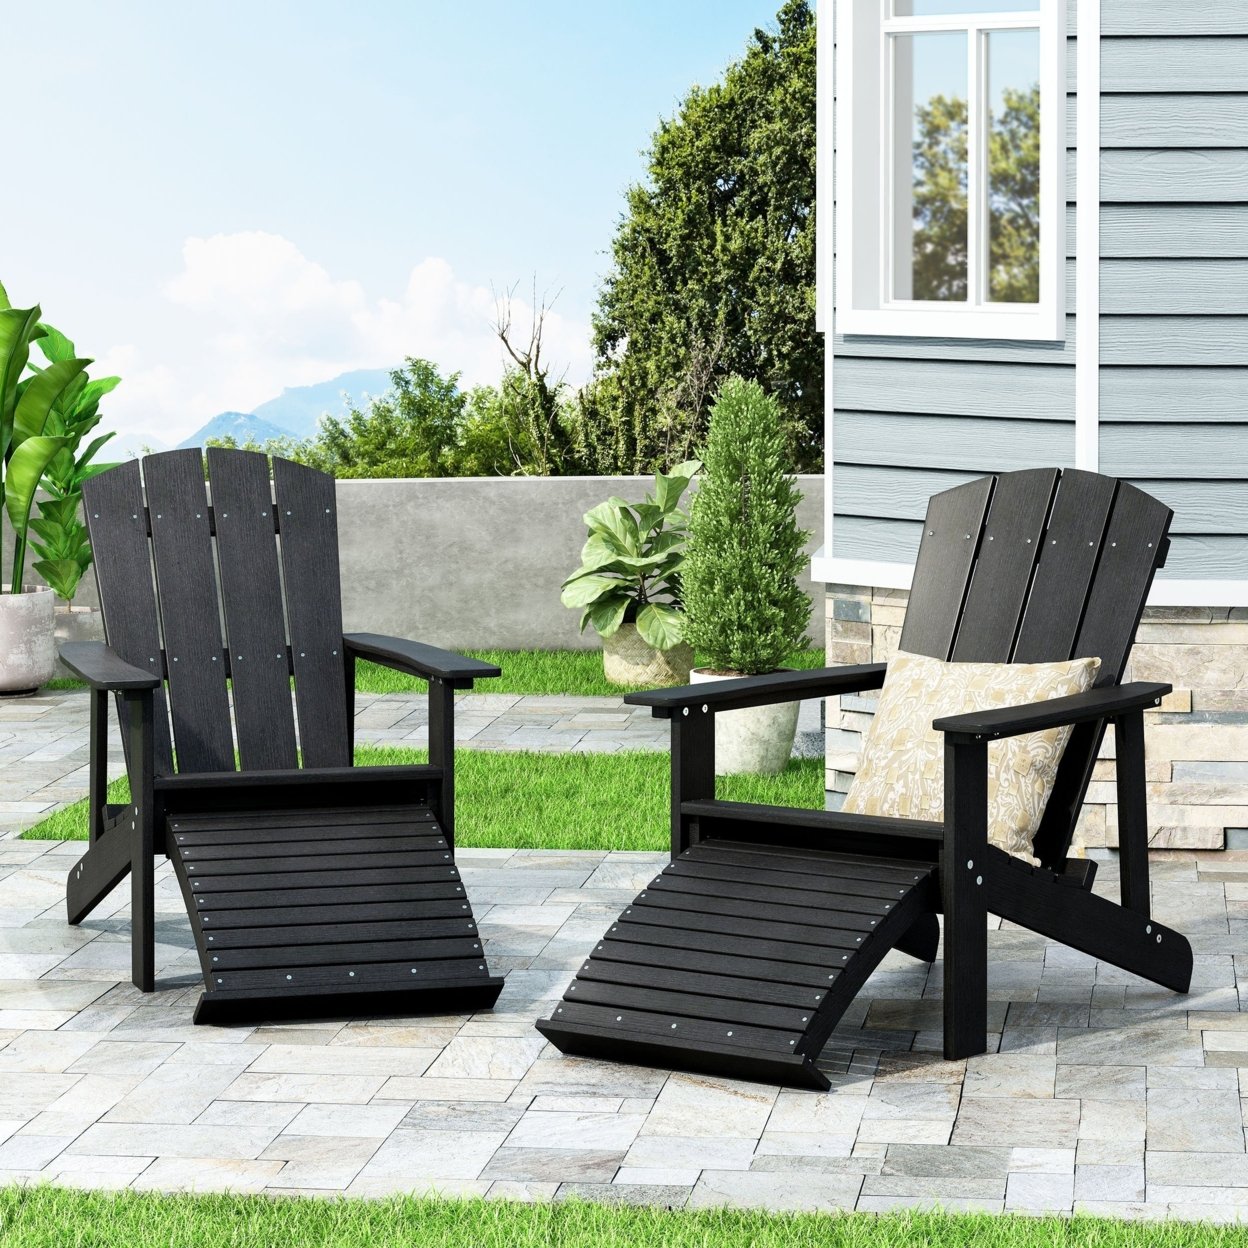 Matriel Outdoor Adirondack Chair With Retractable Ottoman (Set Of 2) - Black